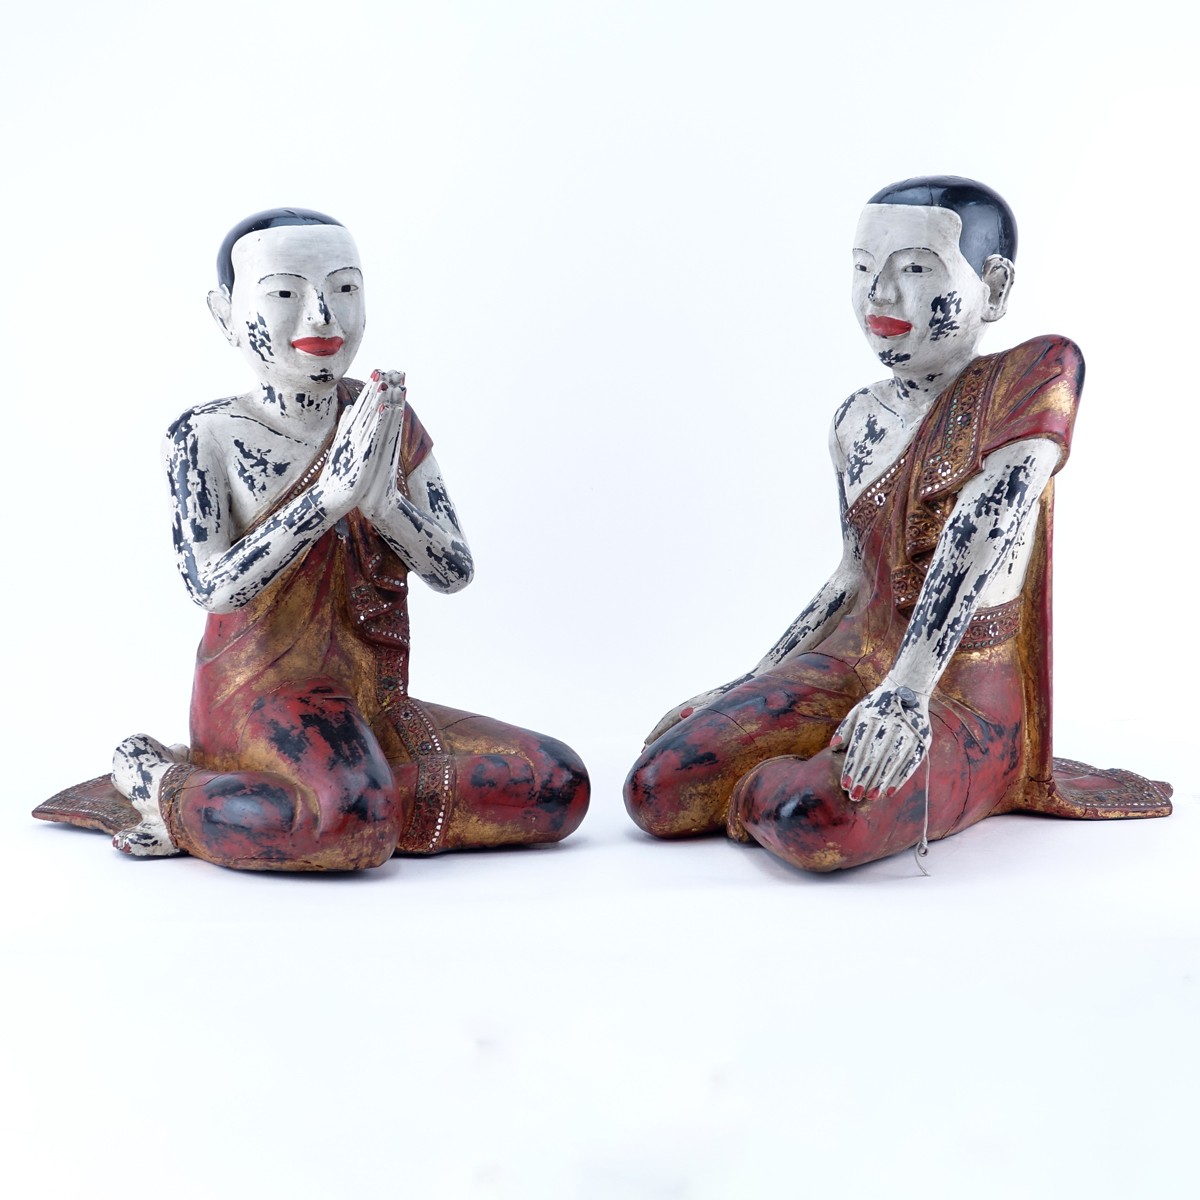 Pair of Large Burmese Polychrome Wood and Glass Beaded Buddhist Sculptures. Typical age splits, rubbing throughout, missing glass.